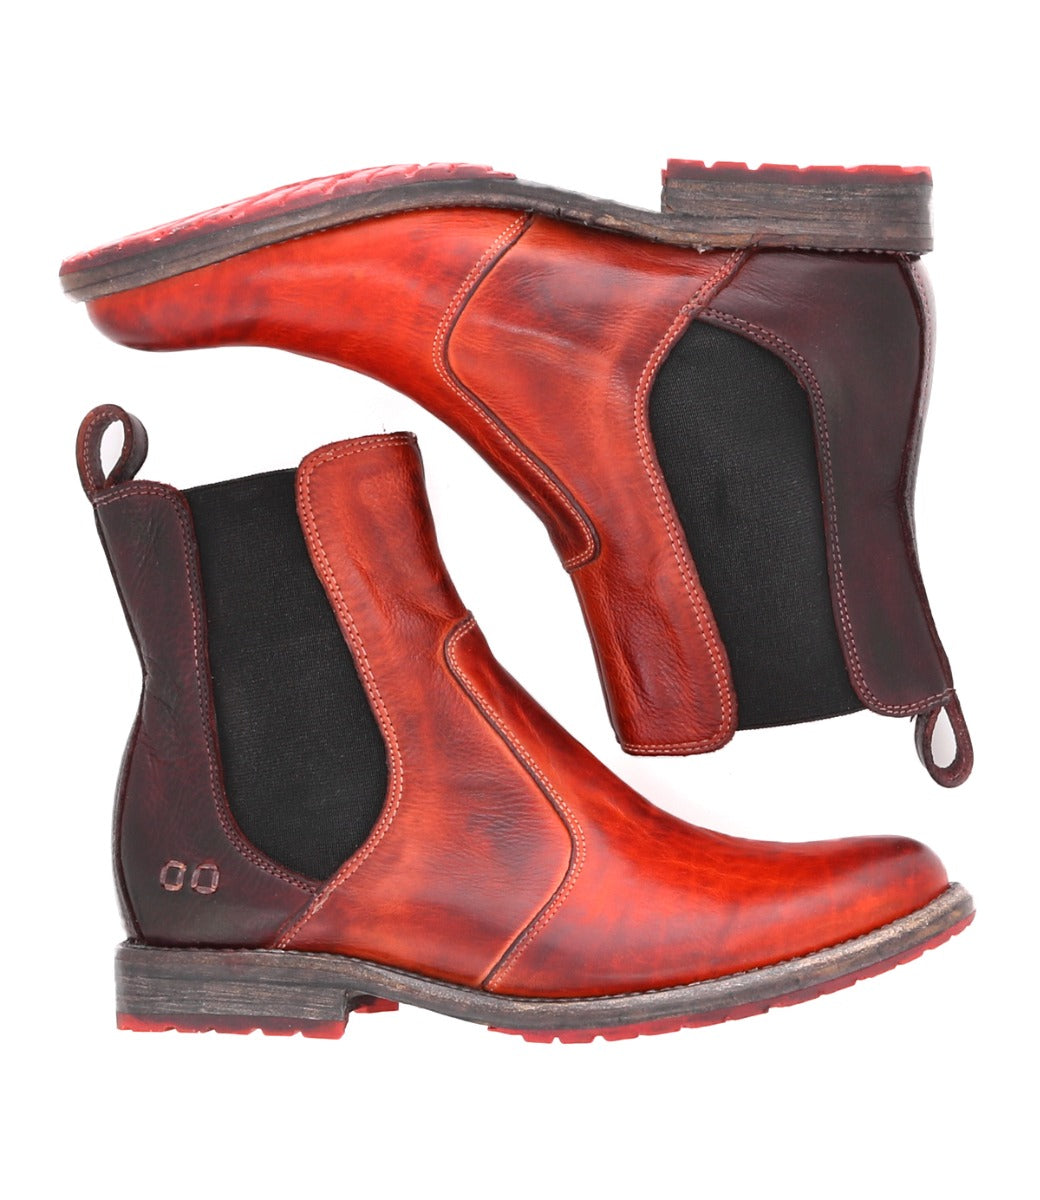 A pair of Nandi red chelsea boots from the Bed Stu.